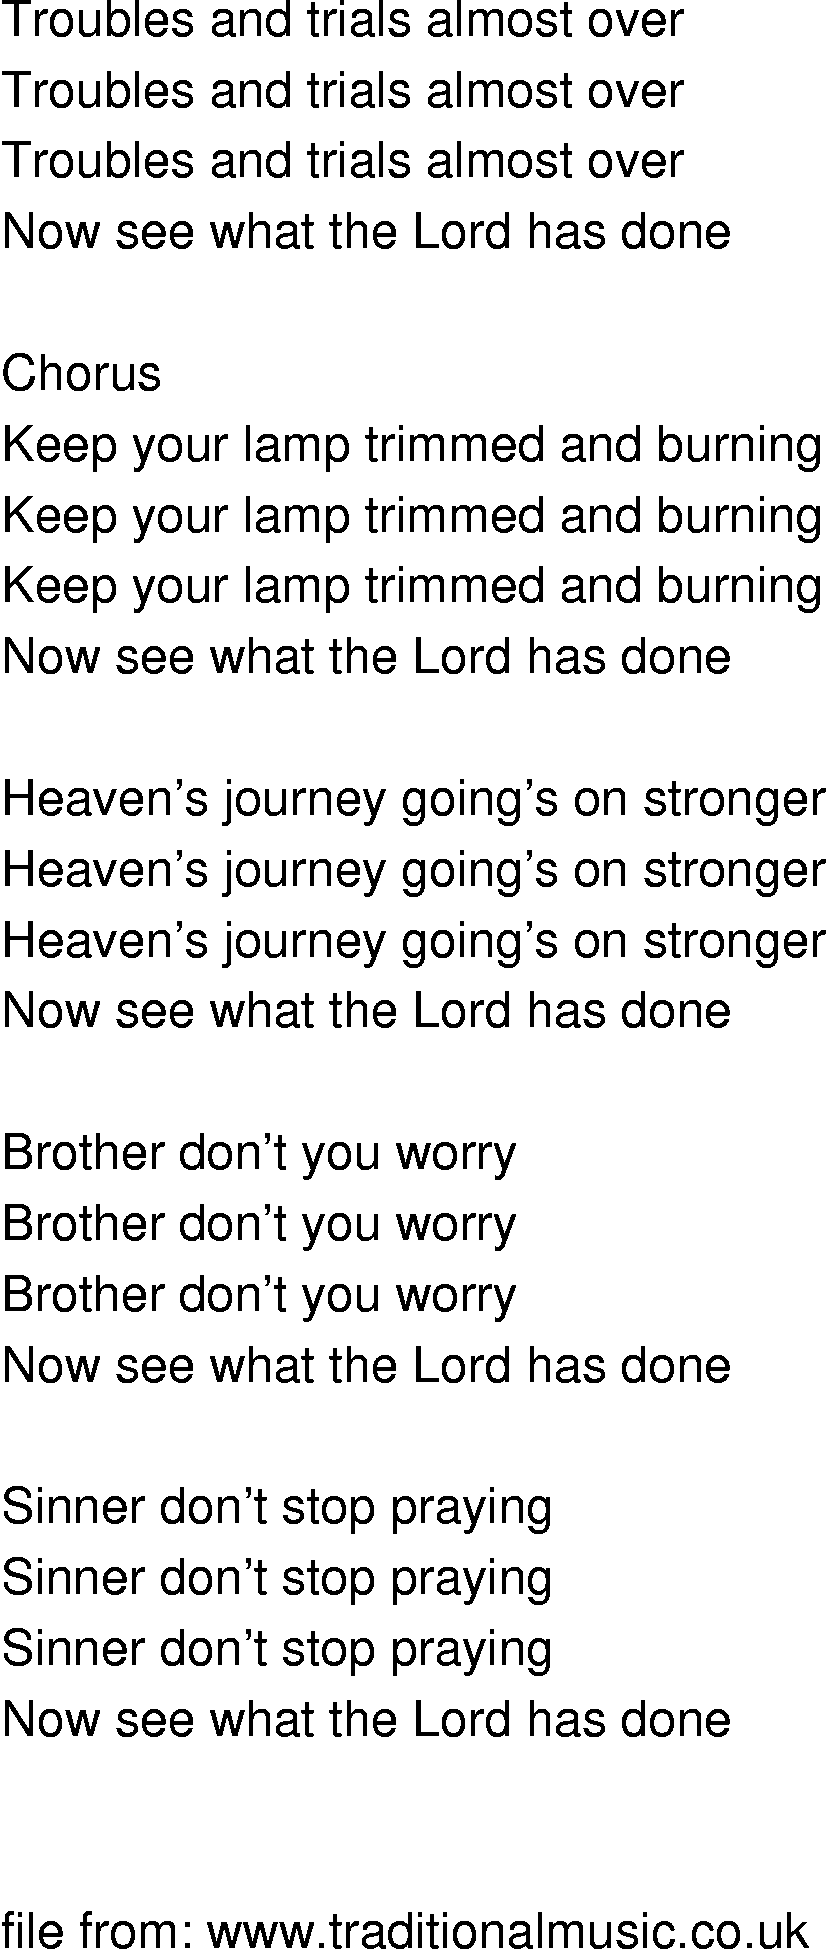 Old-Time (oldtimey) Song Lyrics - keep your lamp trimmed and burning